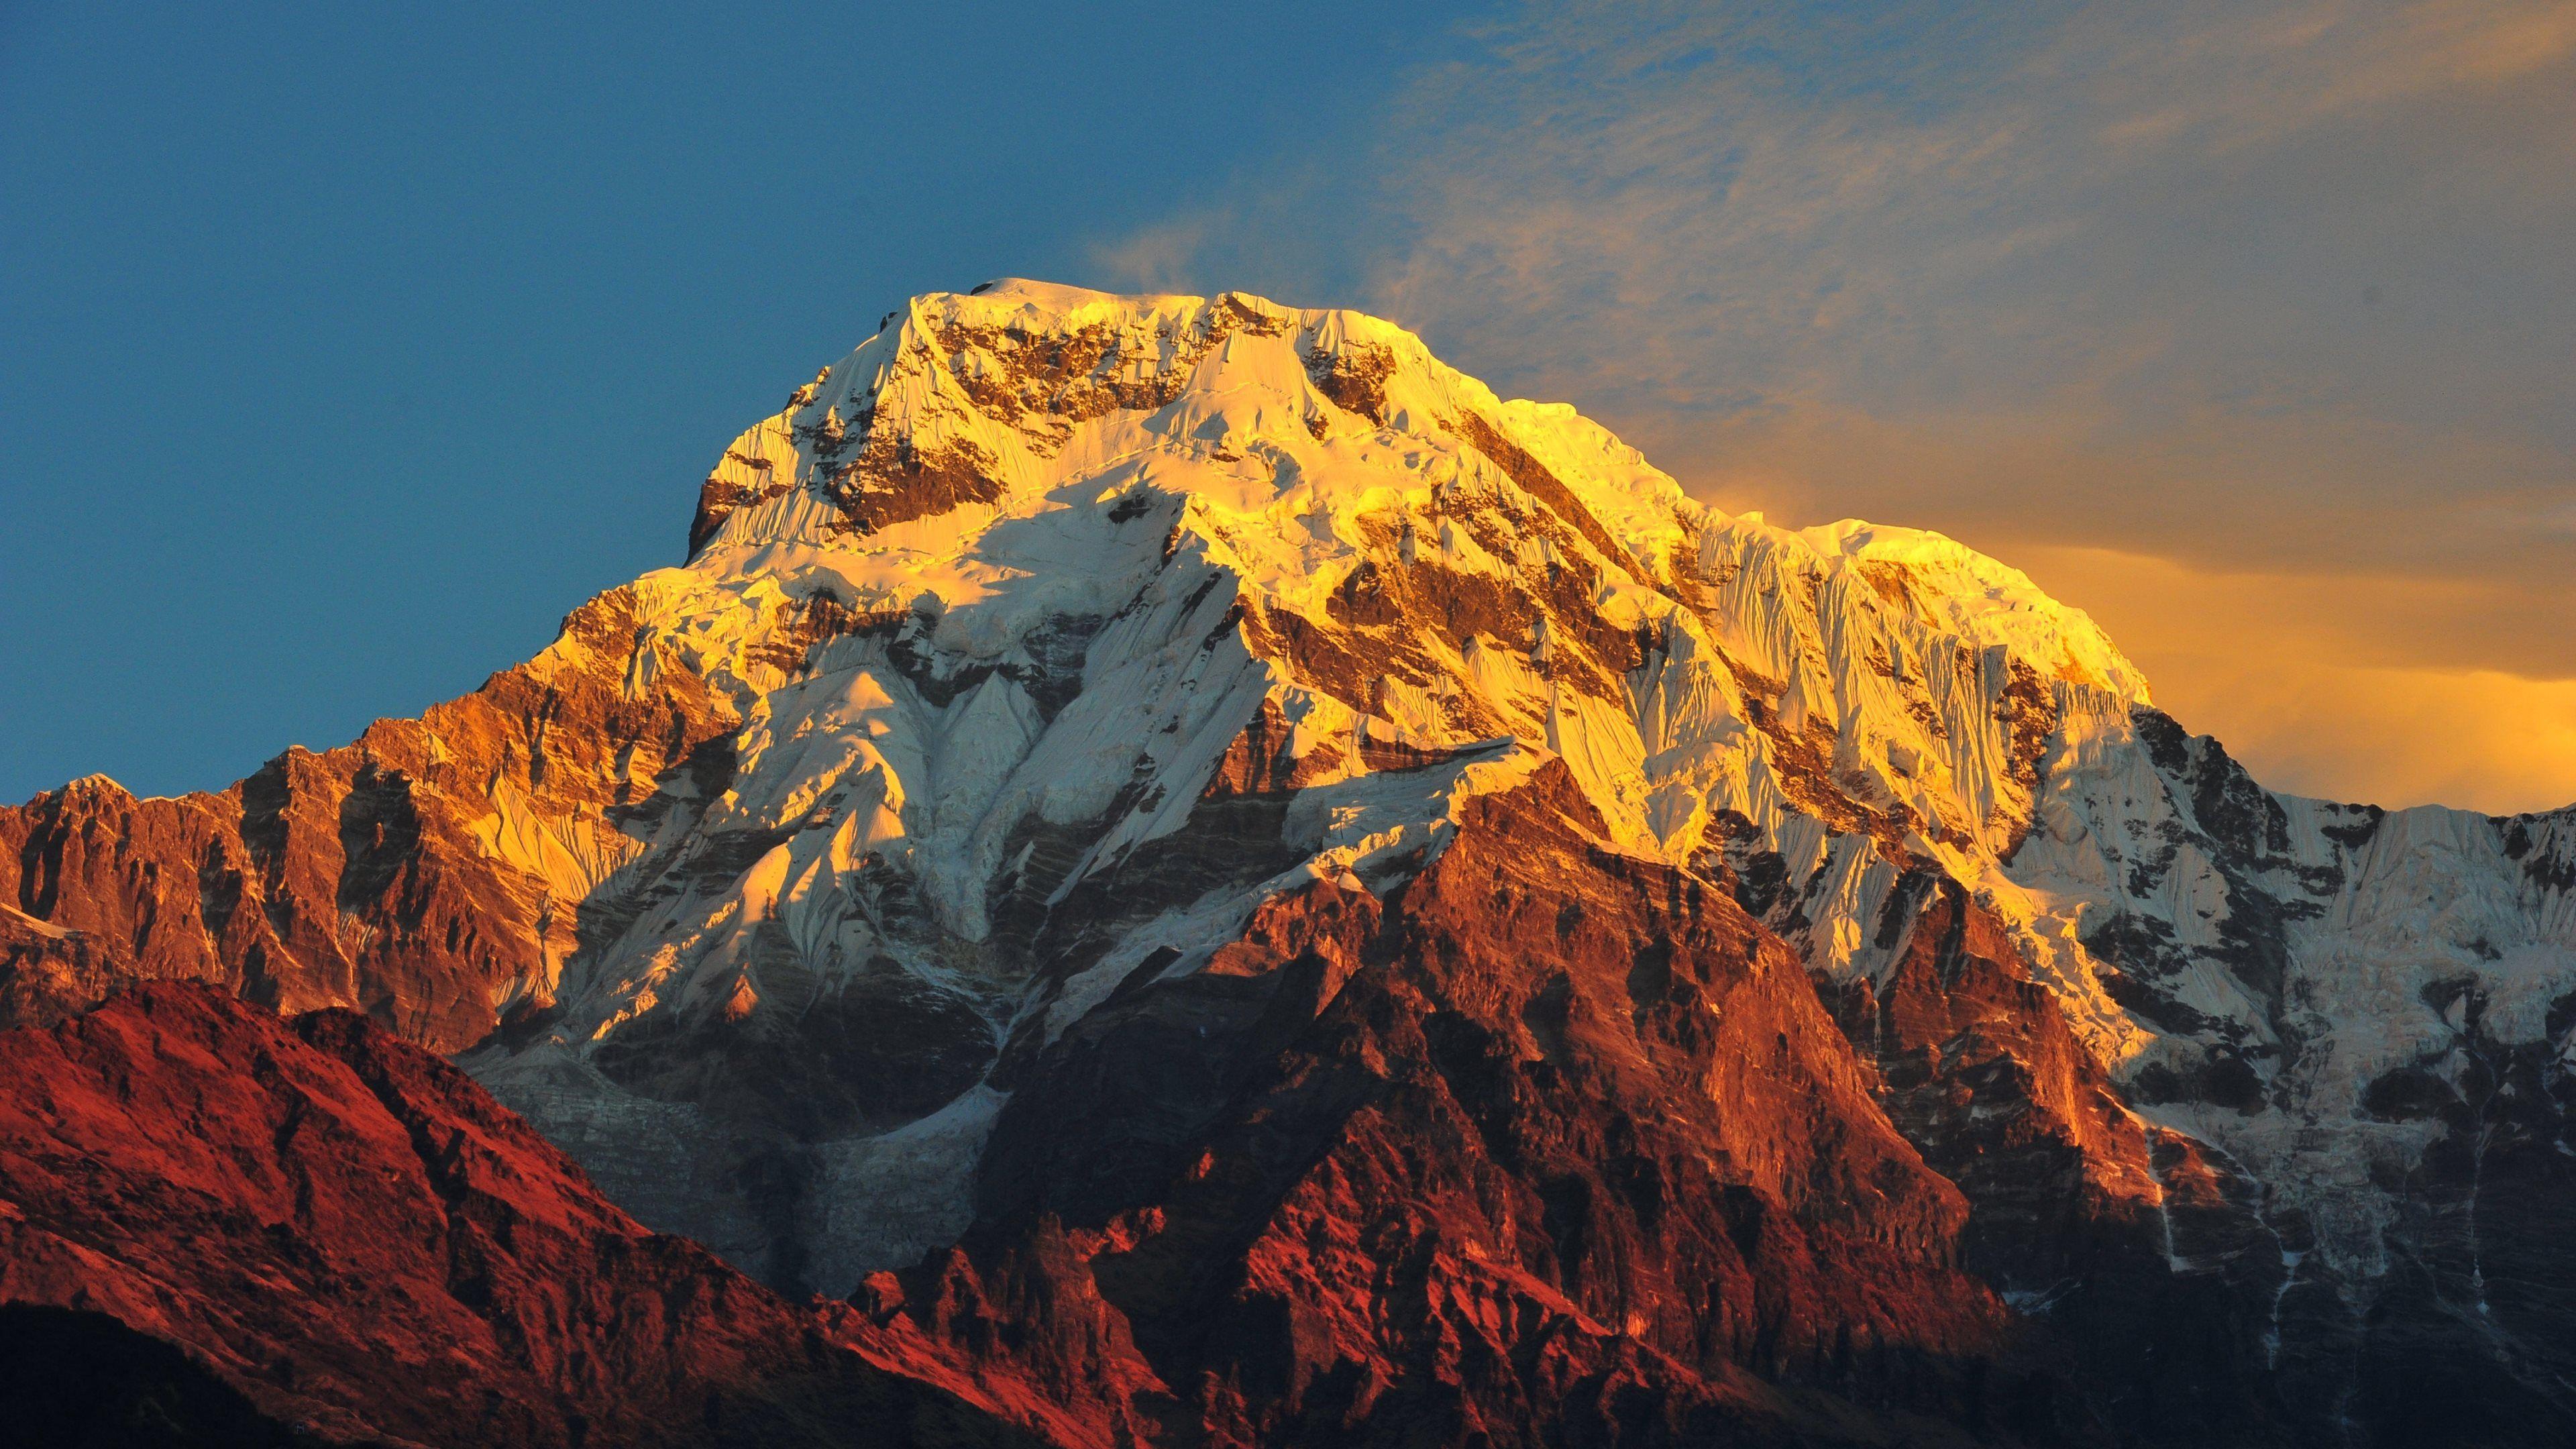 Everest Mountain Wallpapers Top Free Everest Mountain Backgrounds